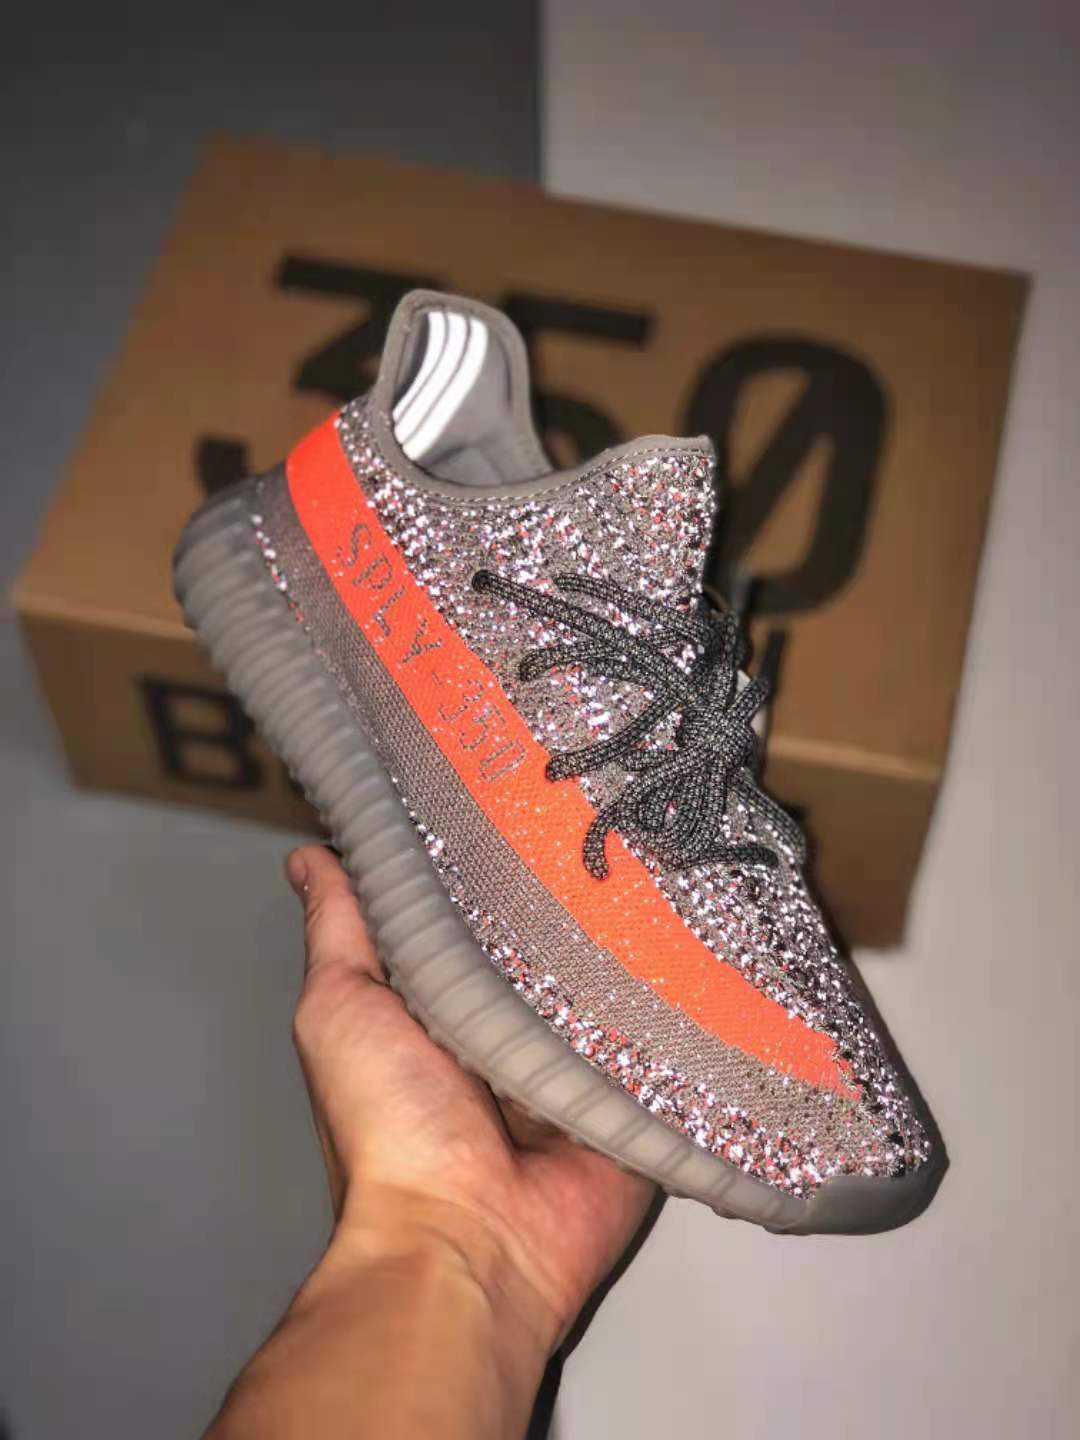 Adidas Yeezy Boost 350 V2 'Beluga Reflective' GW1229 - Stylish and Reflective Footwear Available Now!